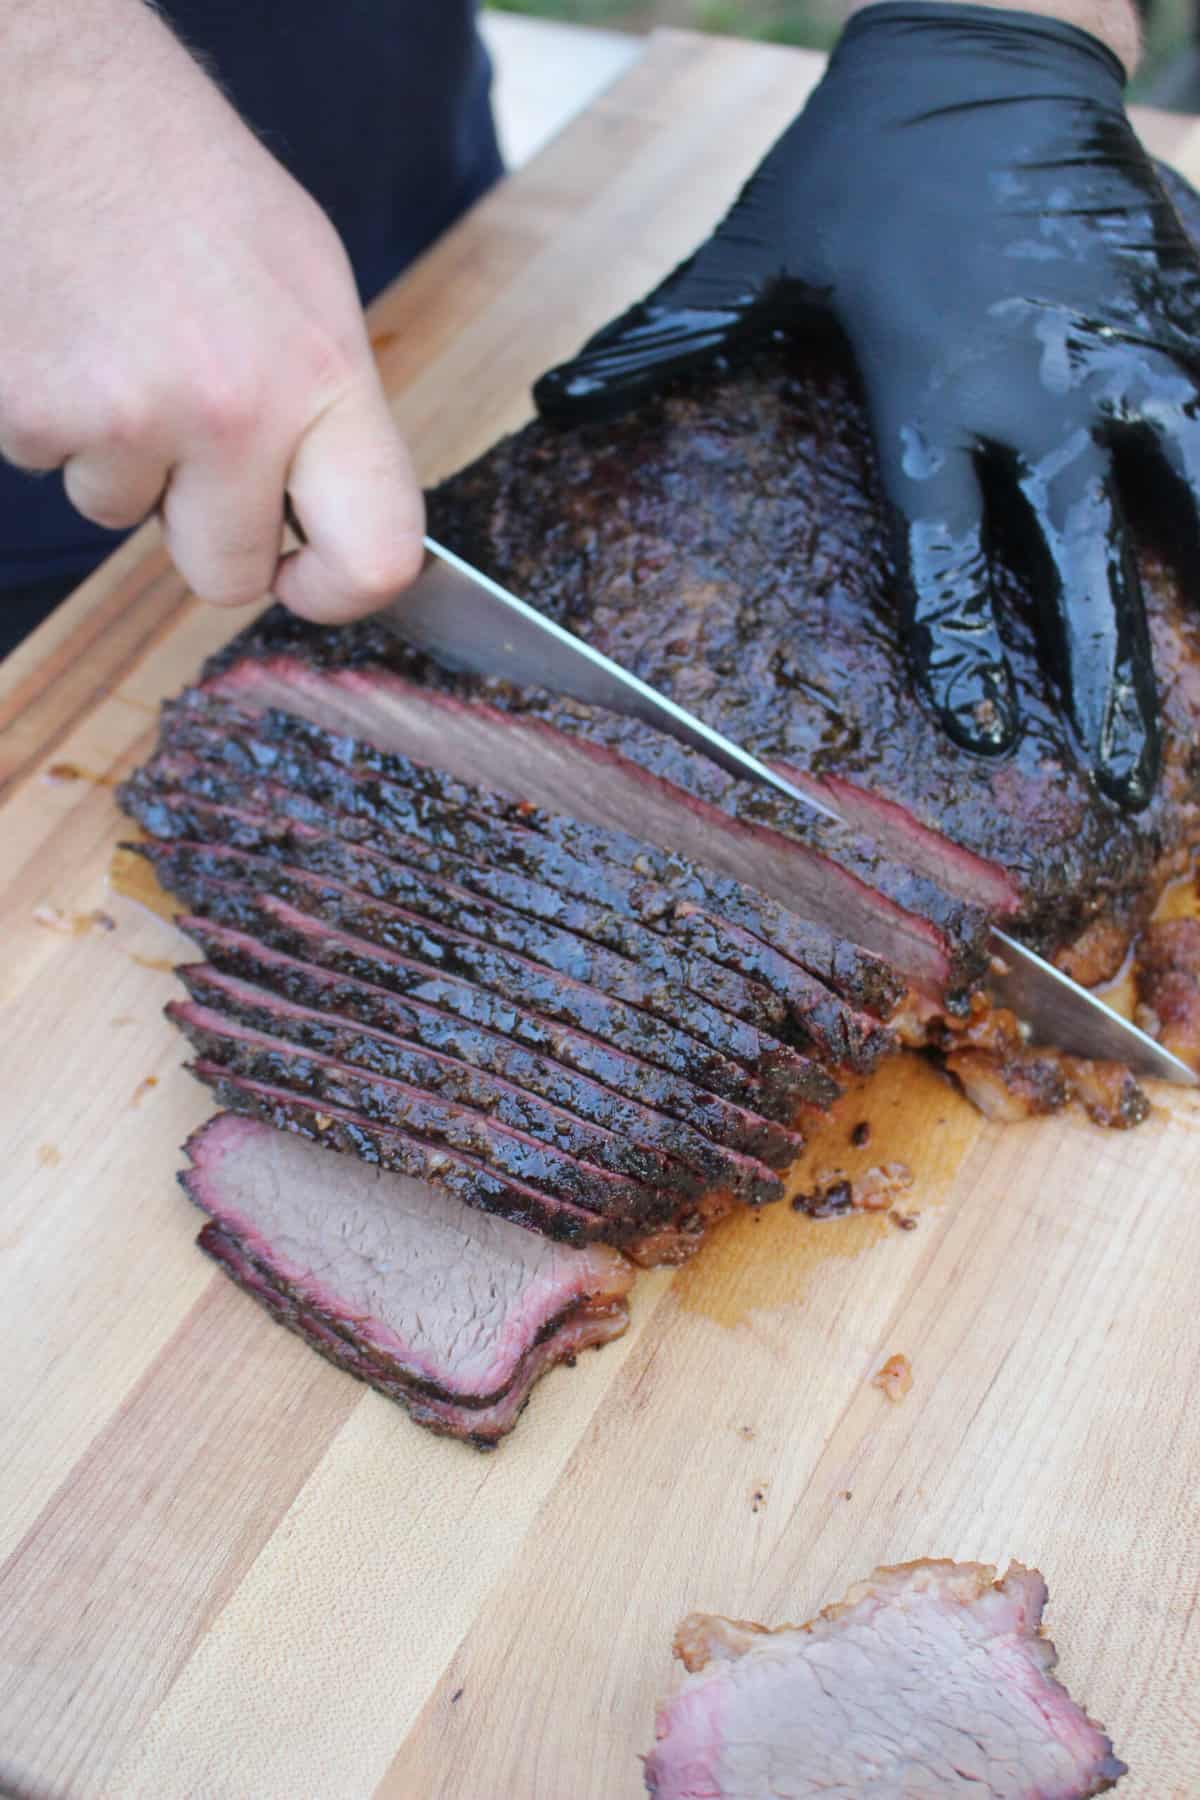 Derek slicing into the meat to finish out this smoked brisket recipe.